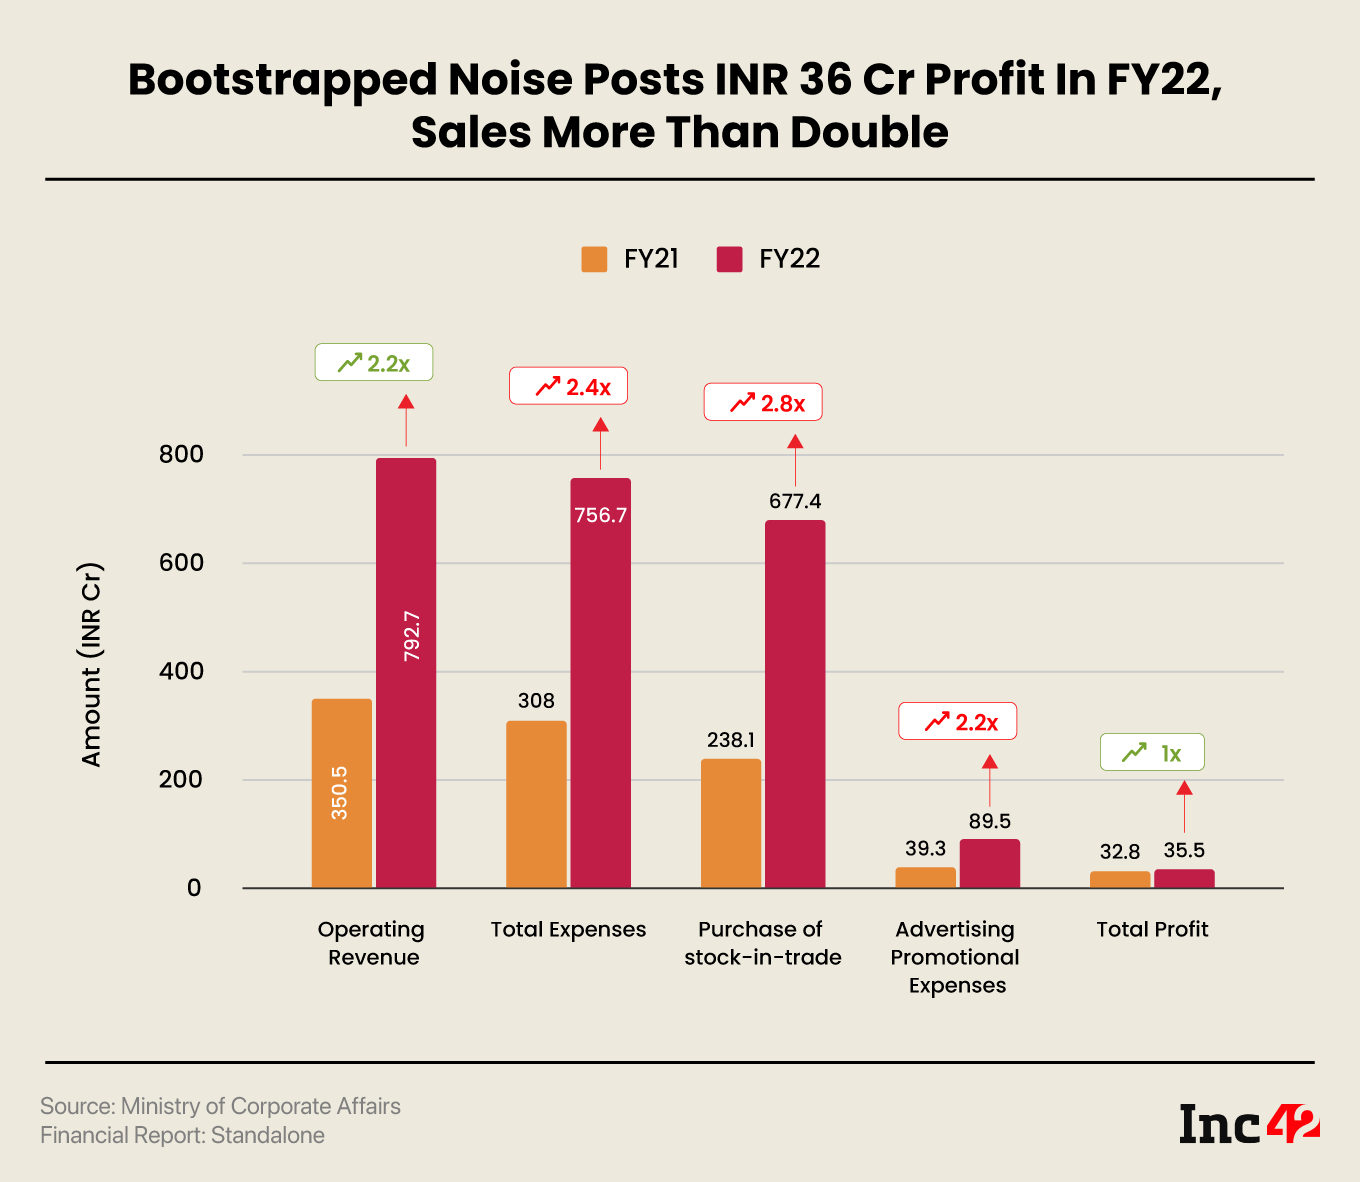 Bootstrapped startup Noise reported a 8% rise in its net profit to INR 35.5 Cr in the financial year 2021-22 (FY22) from INR 32.8 Cr in FY21